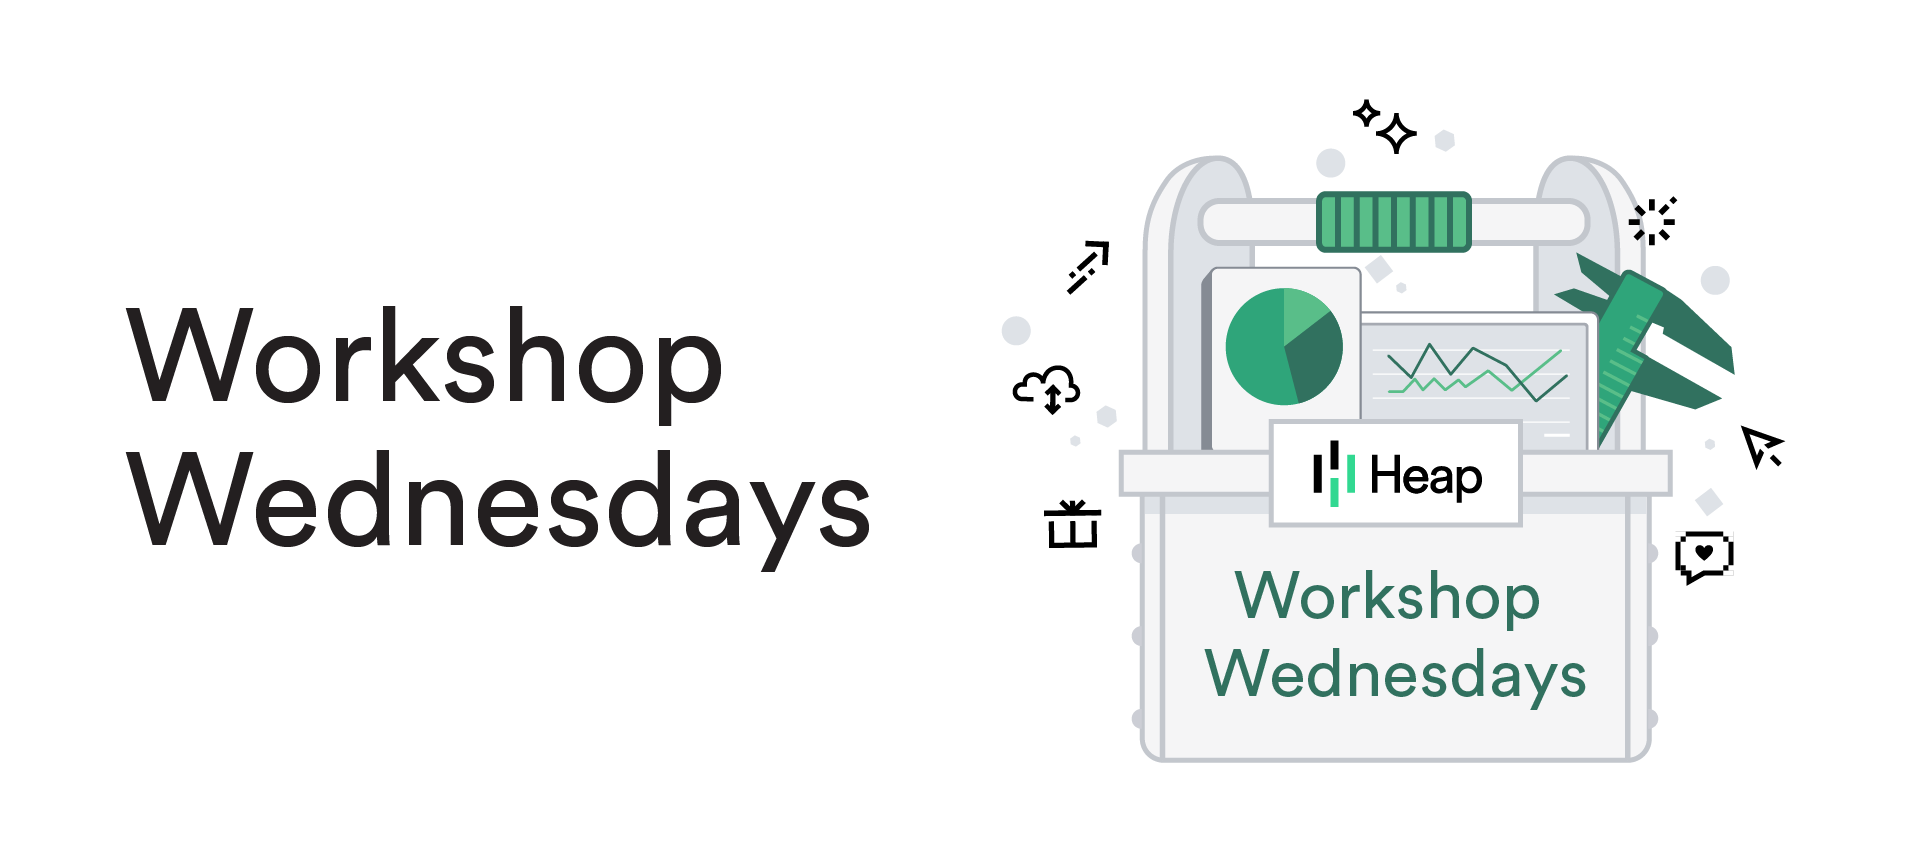 Workshop Wednesday: Set Up and Maintain Your Data